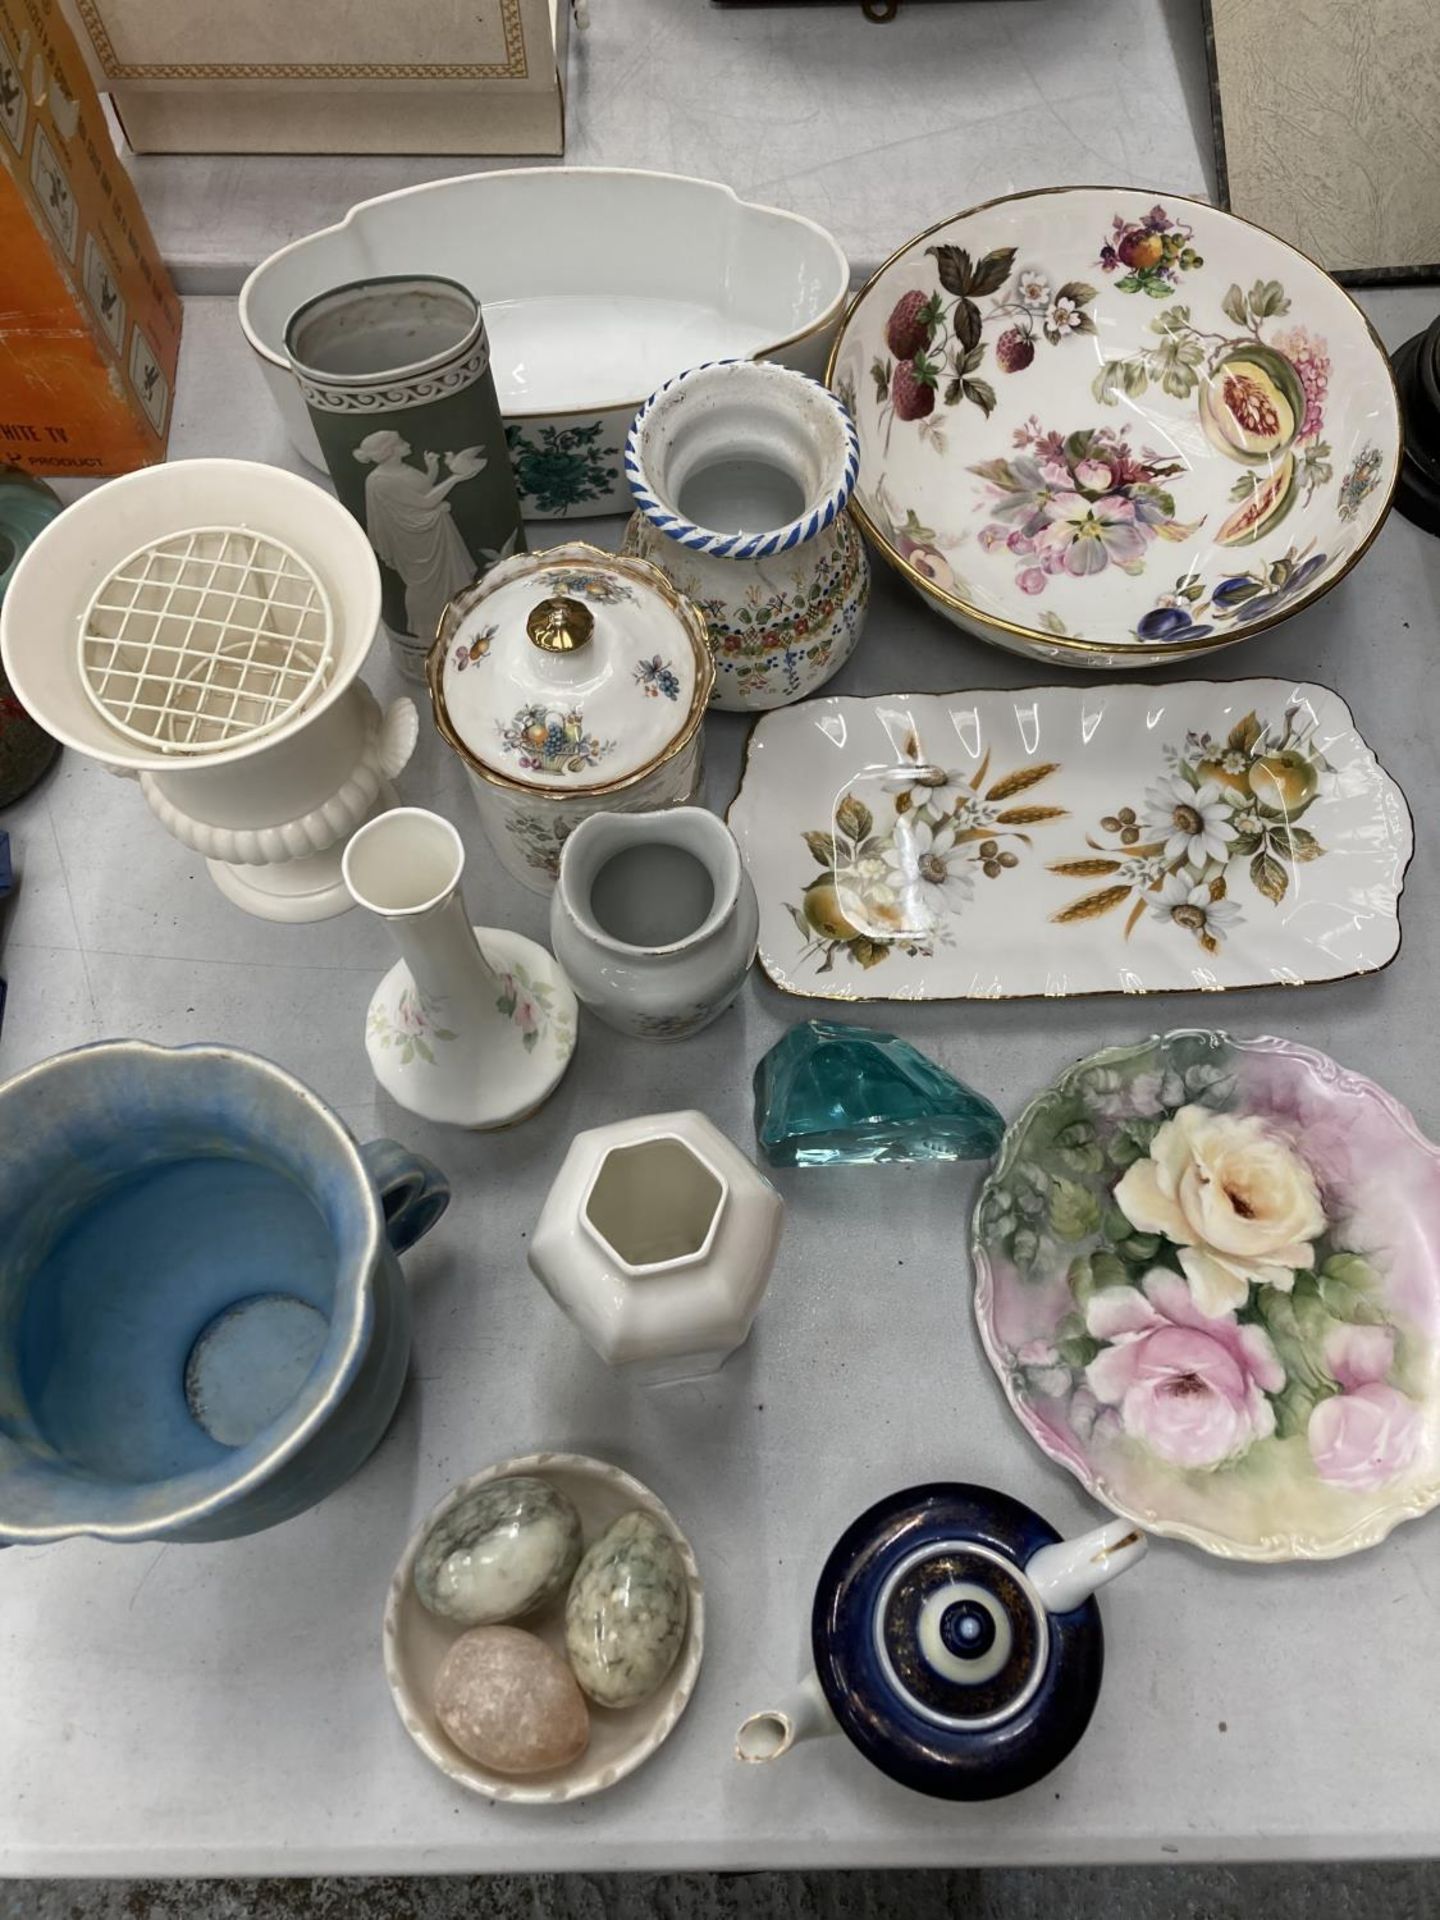 A QUANTITY OF CERAMIC AND CHINA TO INCLUDE BOWLS, VASES, EGGS, A PLANTER, ETC PLUS A PIECE OF SIGNED